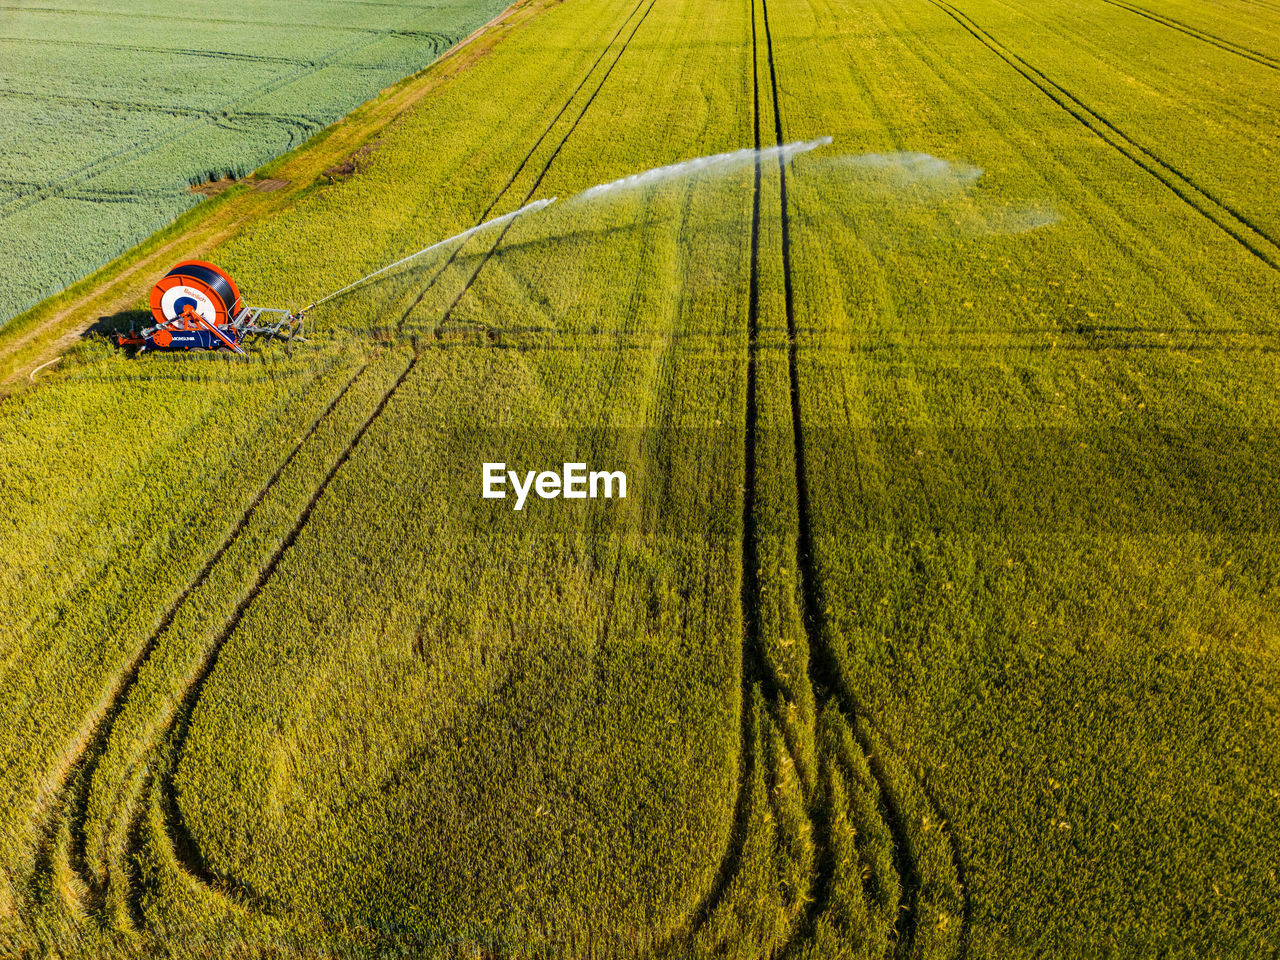 Aerial view of sprinkler system on a field with grain in summer, germany